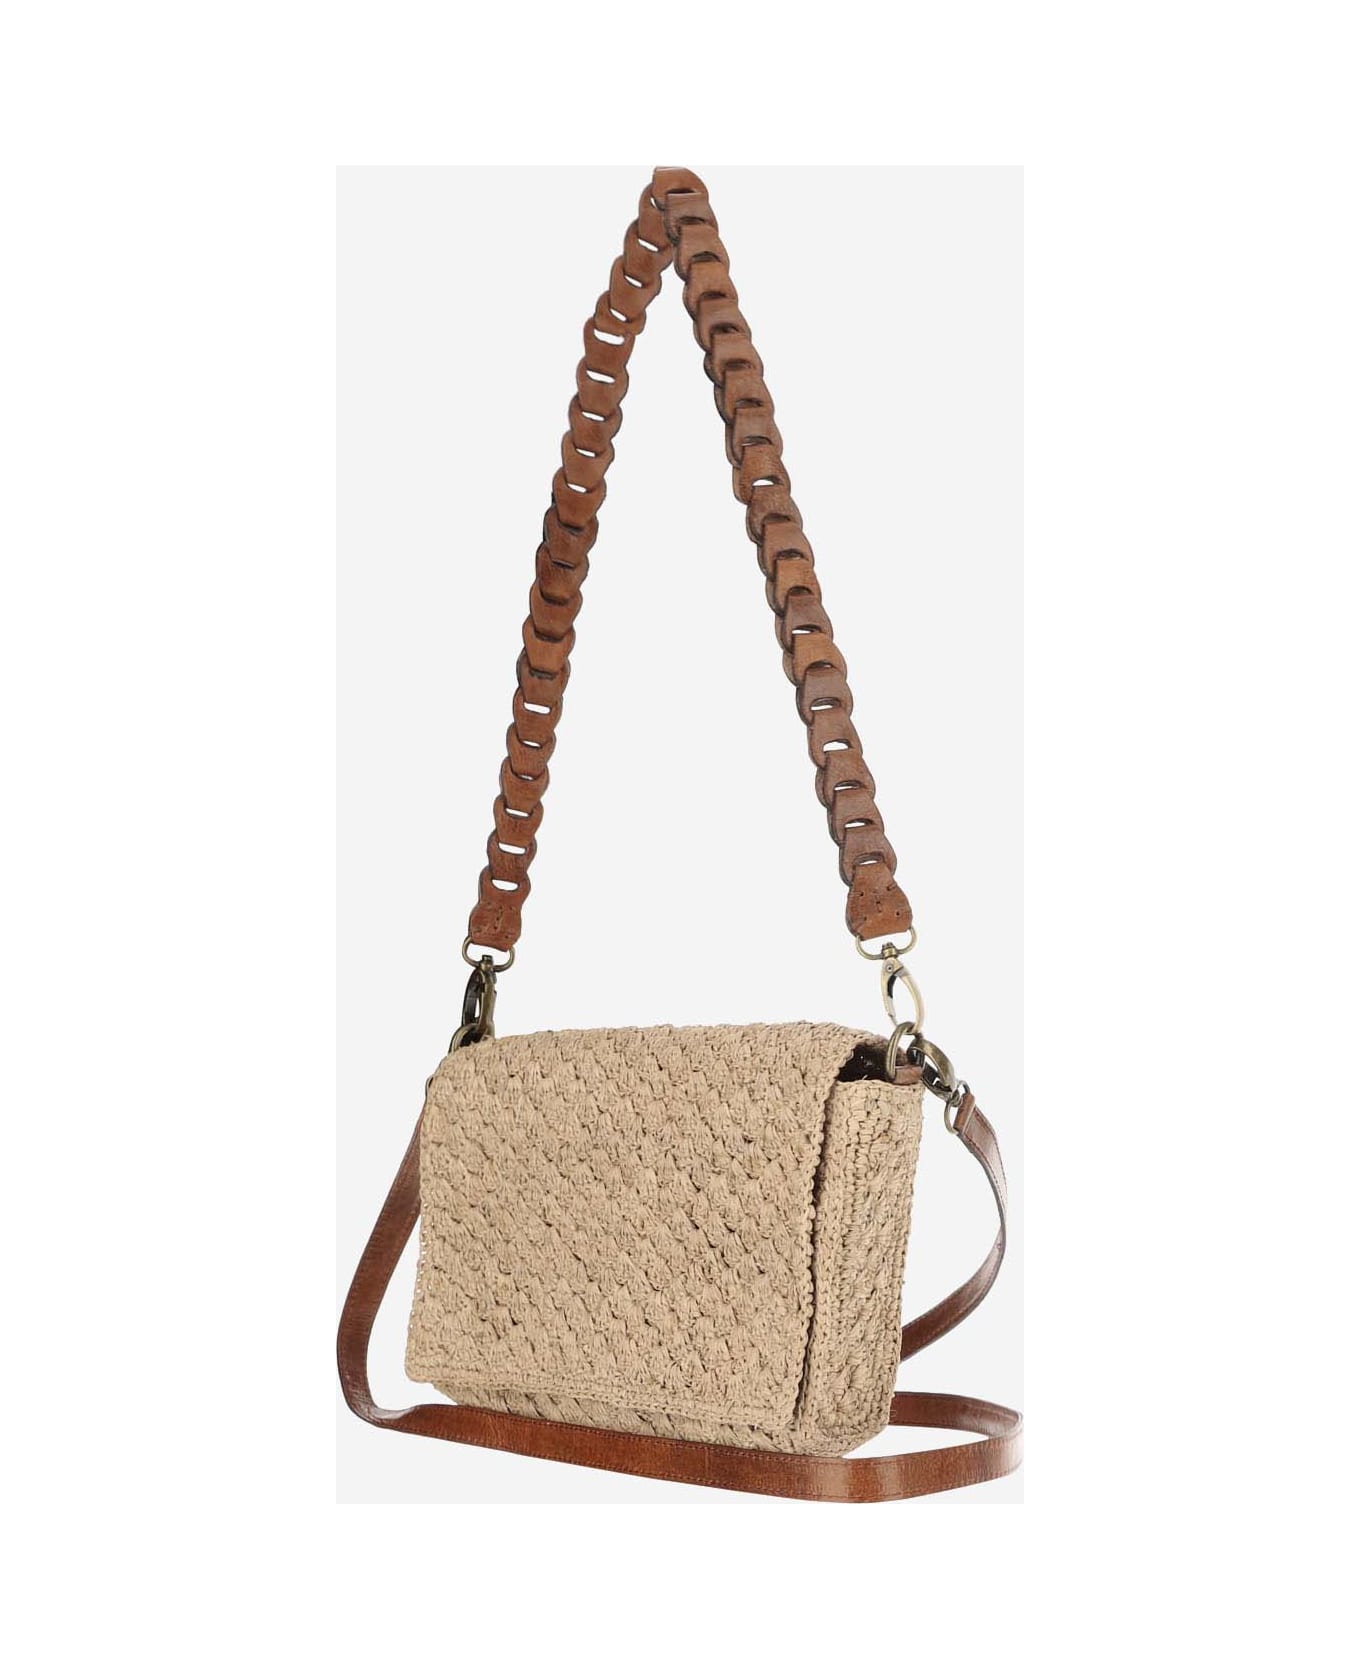 Ibeliv Sonia Bag In Raffia And Leather - Beige ショルダーバッグ